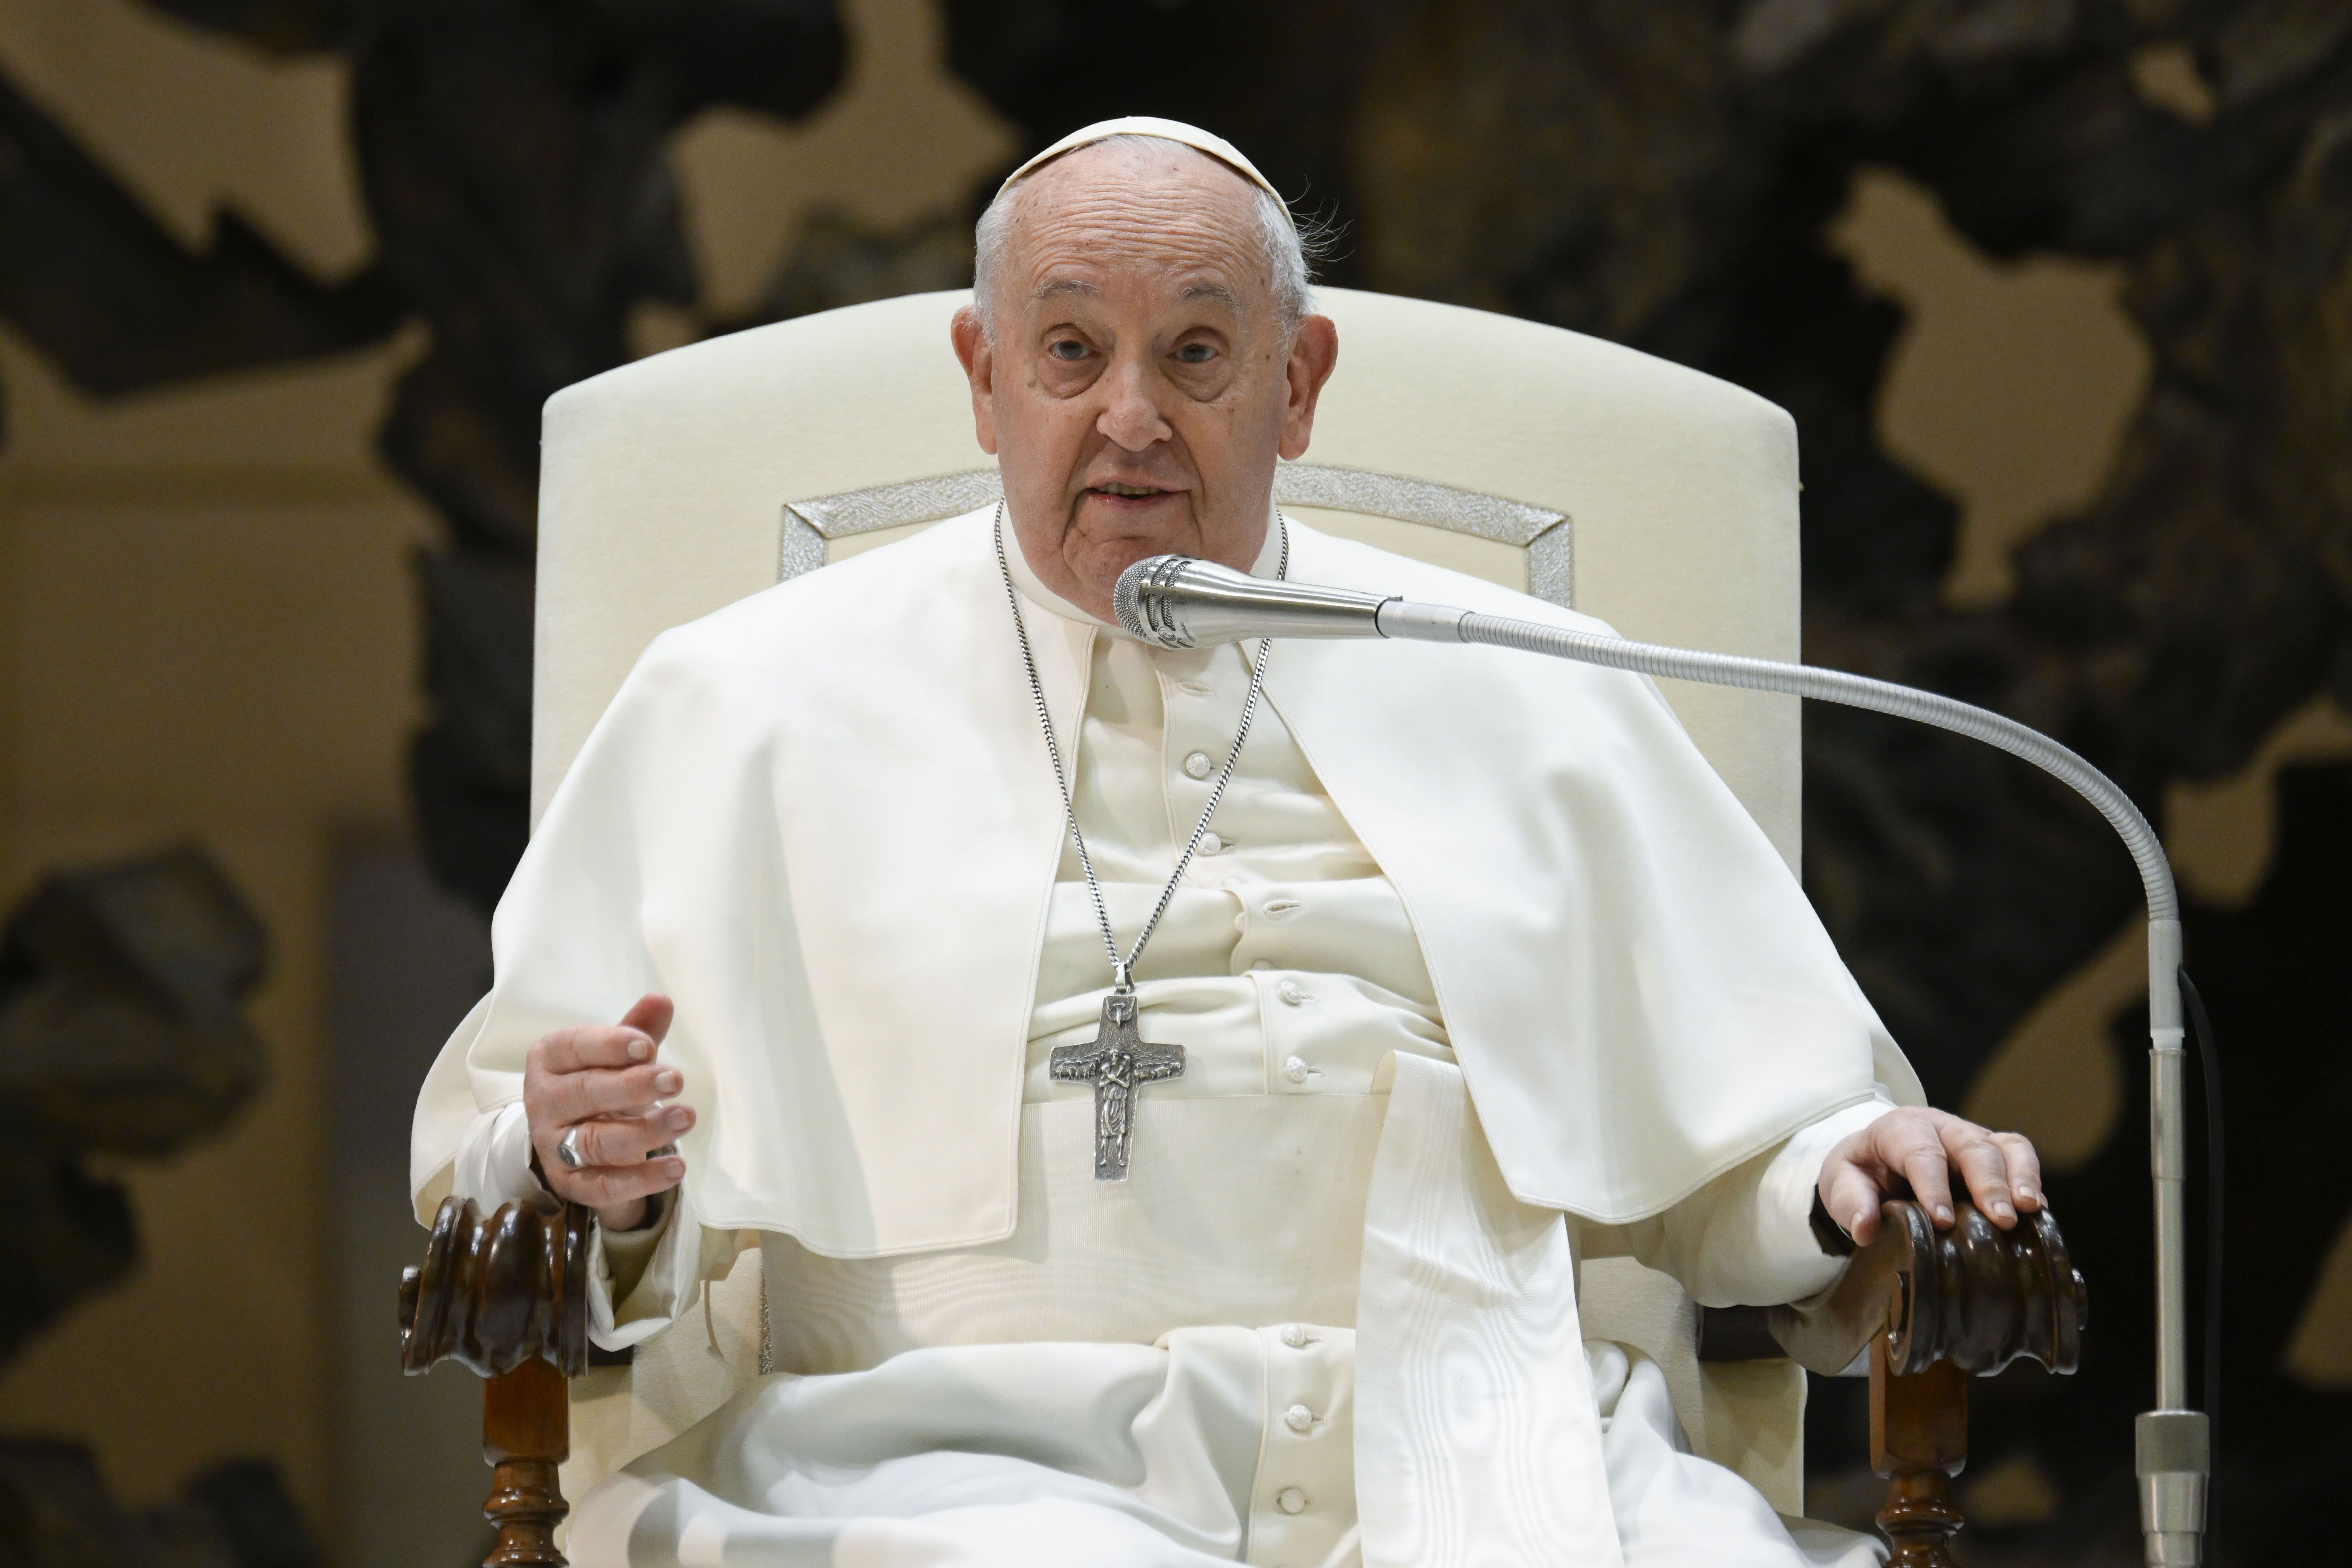 Pope Francis’ message for World Day of Prayer for Vocations stresses fraternity, hope